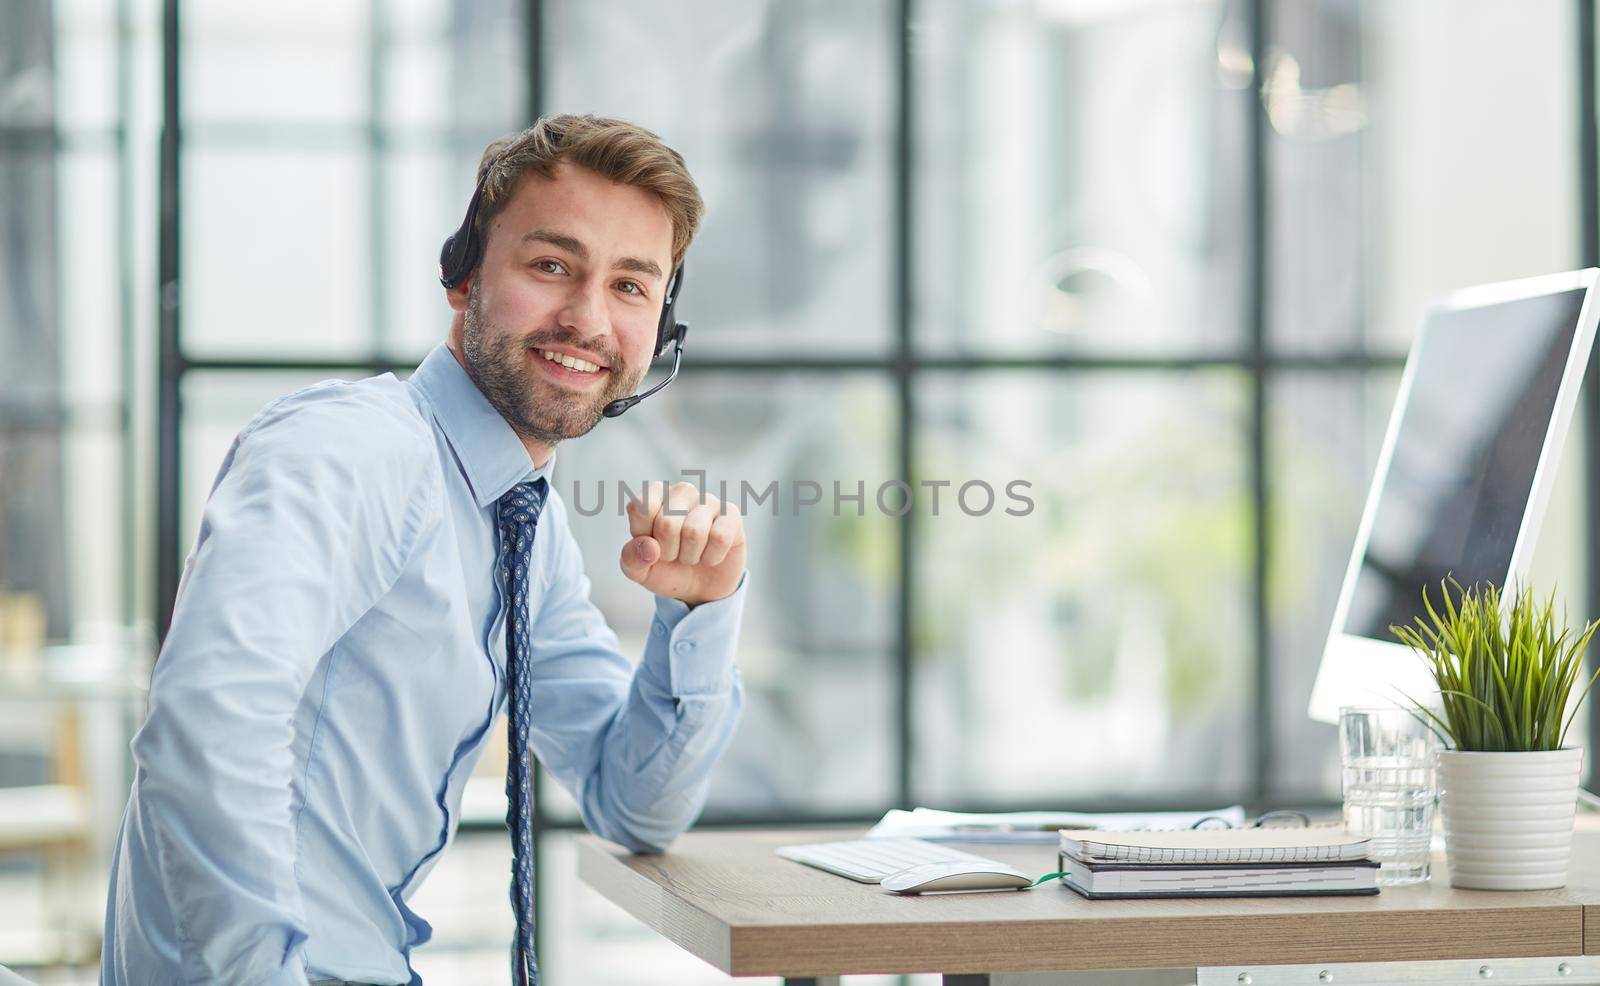 Young handsome male customer support phone operator with headset working in his office